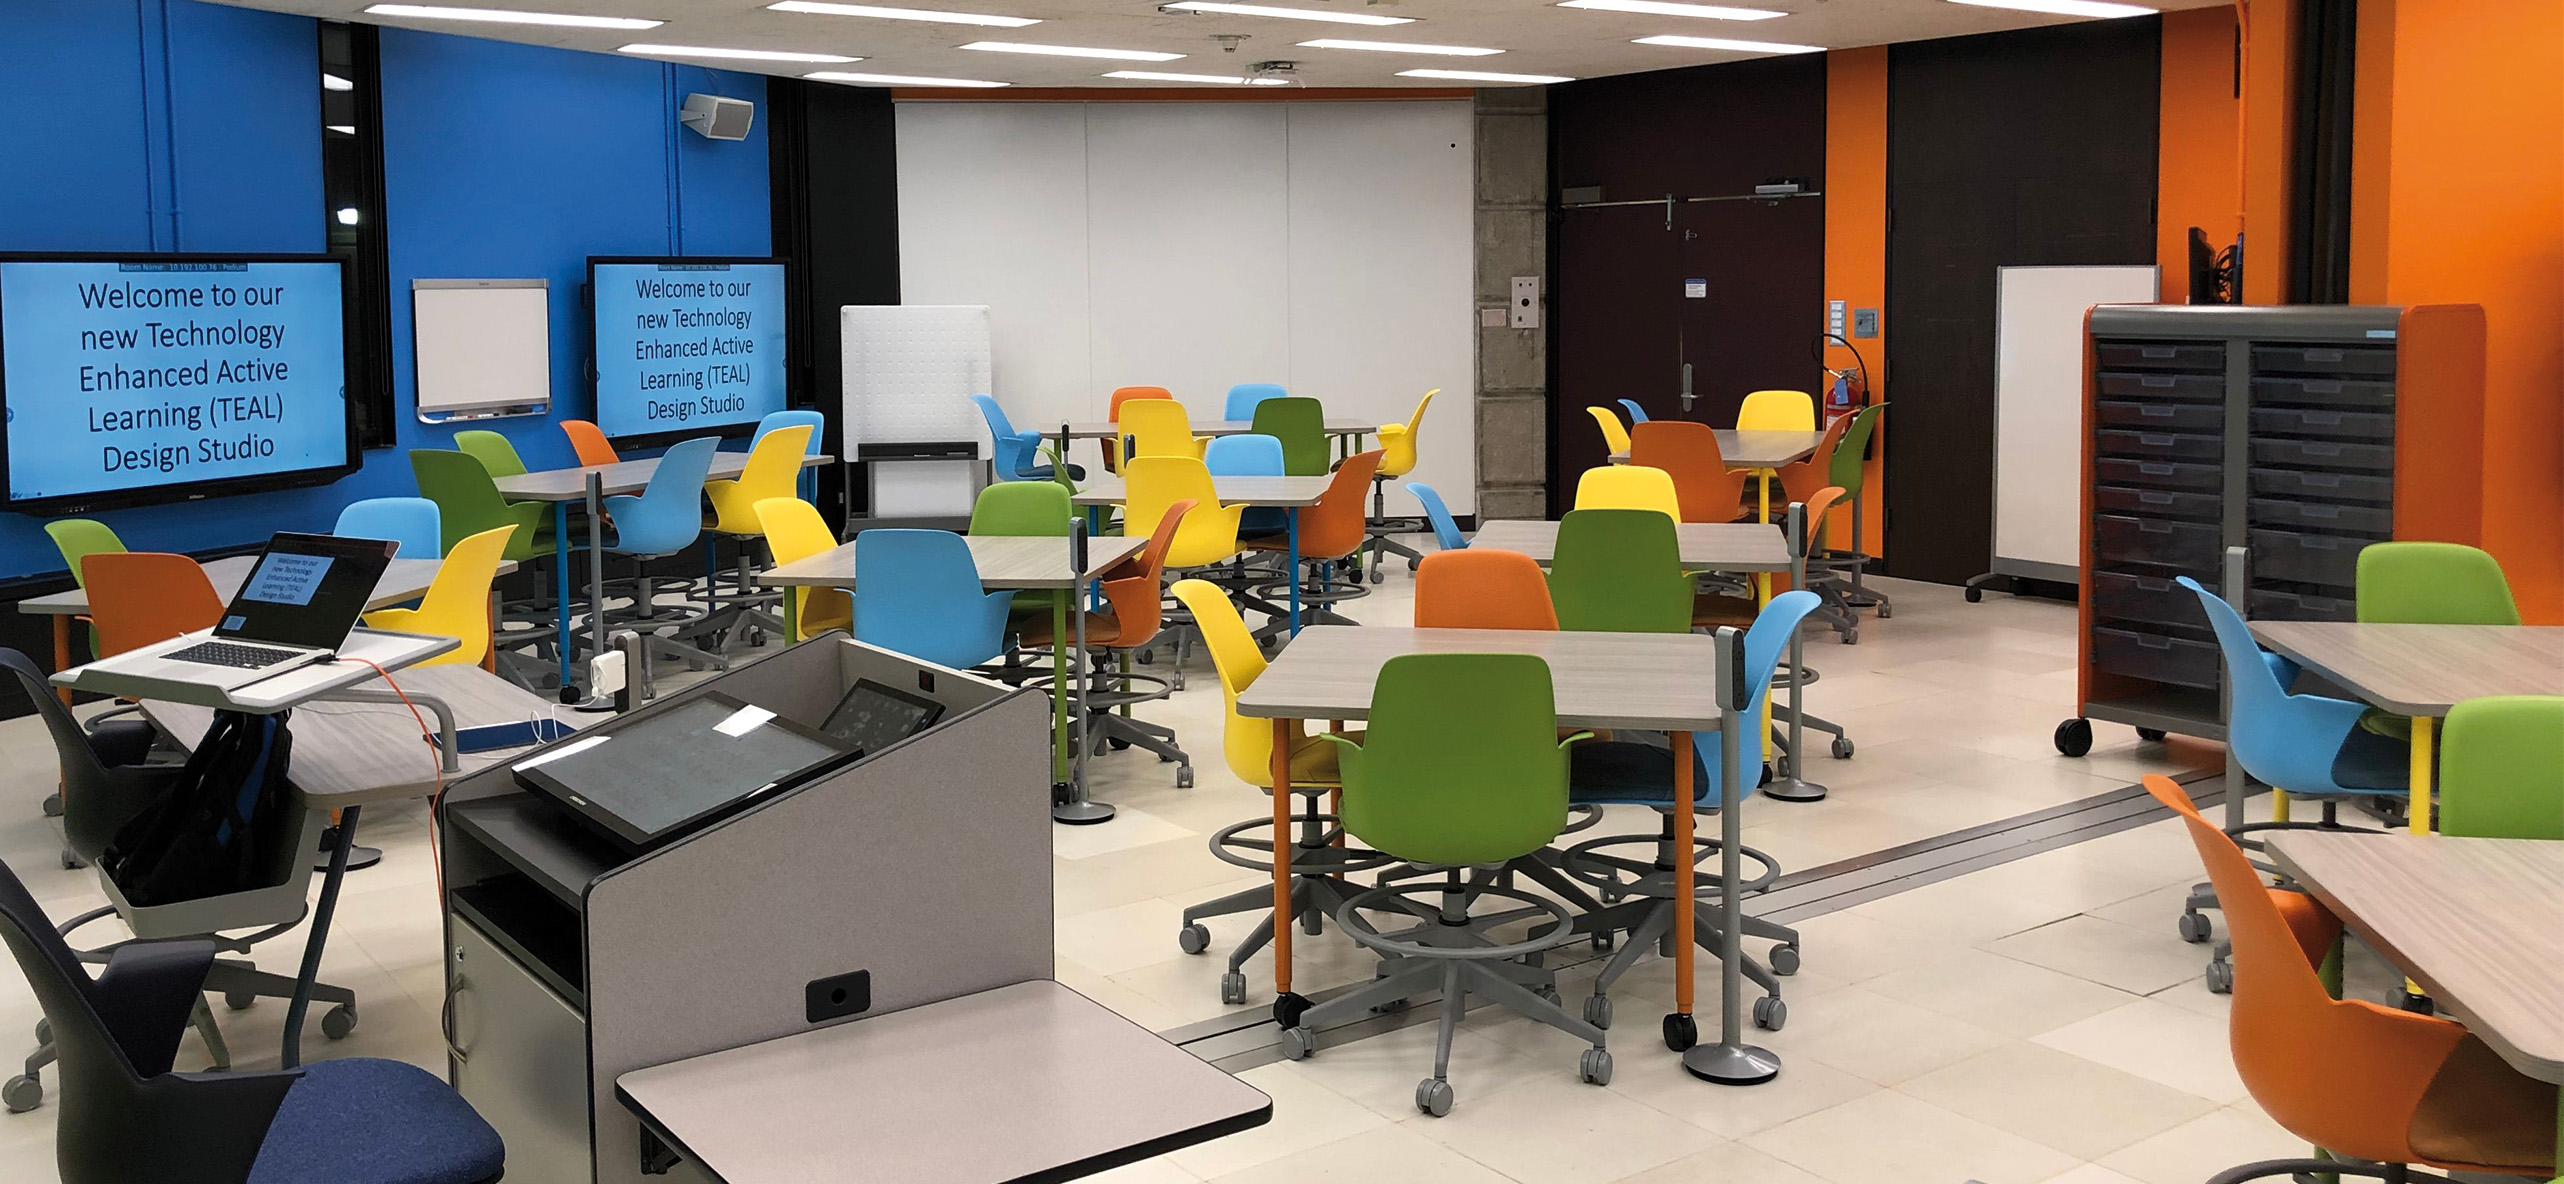 The University of Toronto implements Kramer solutions to continue interactive learning